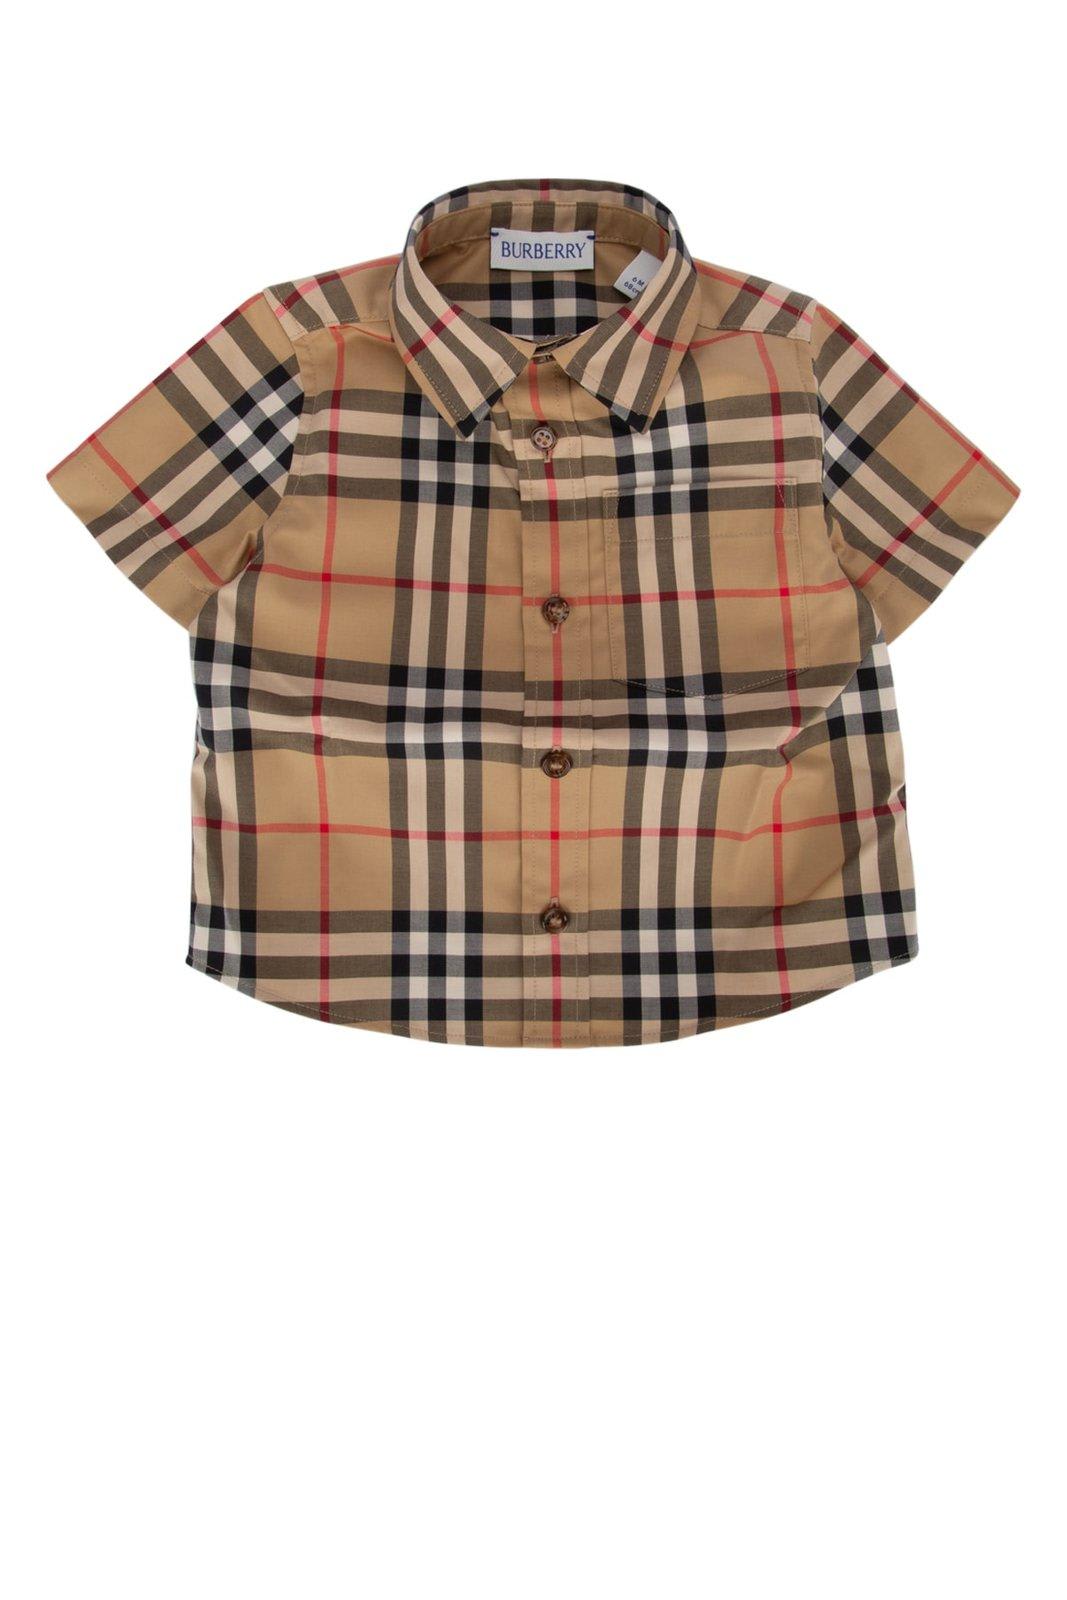 Burberry Kids' Check Pattern Short-sleeved Shirt In Archive Beige Ip Chk